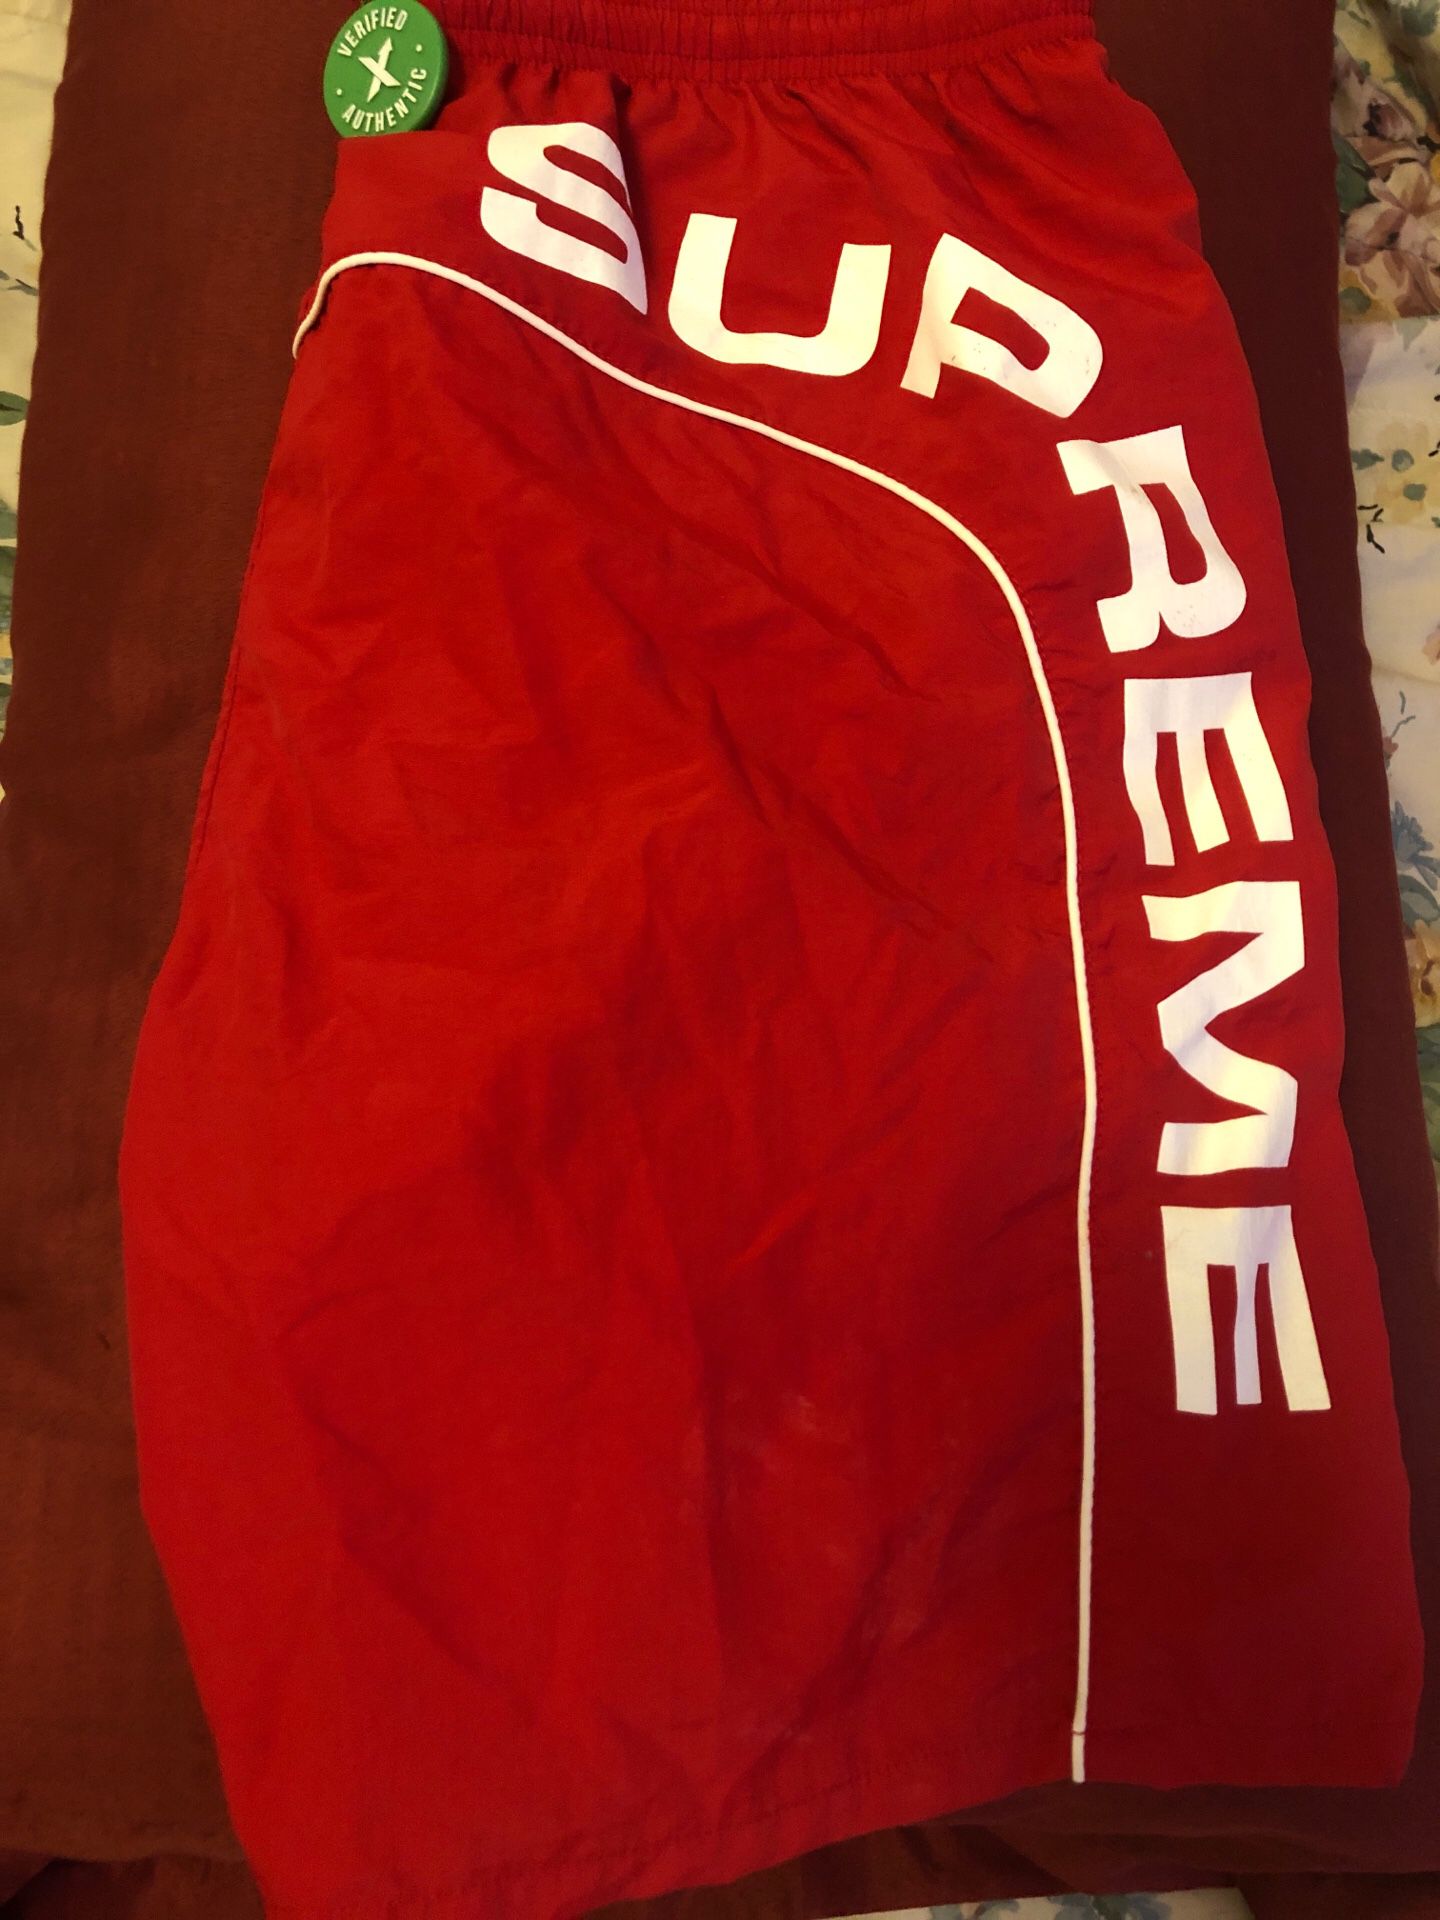 Supreme shorts never worn just was sitting in closet paid $300 for them verified Authentic stock x officials